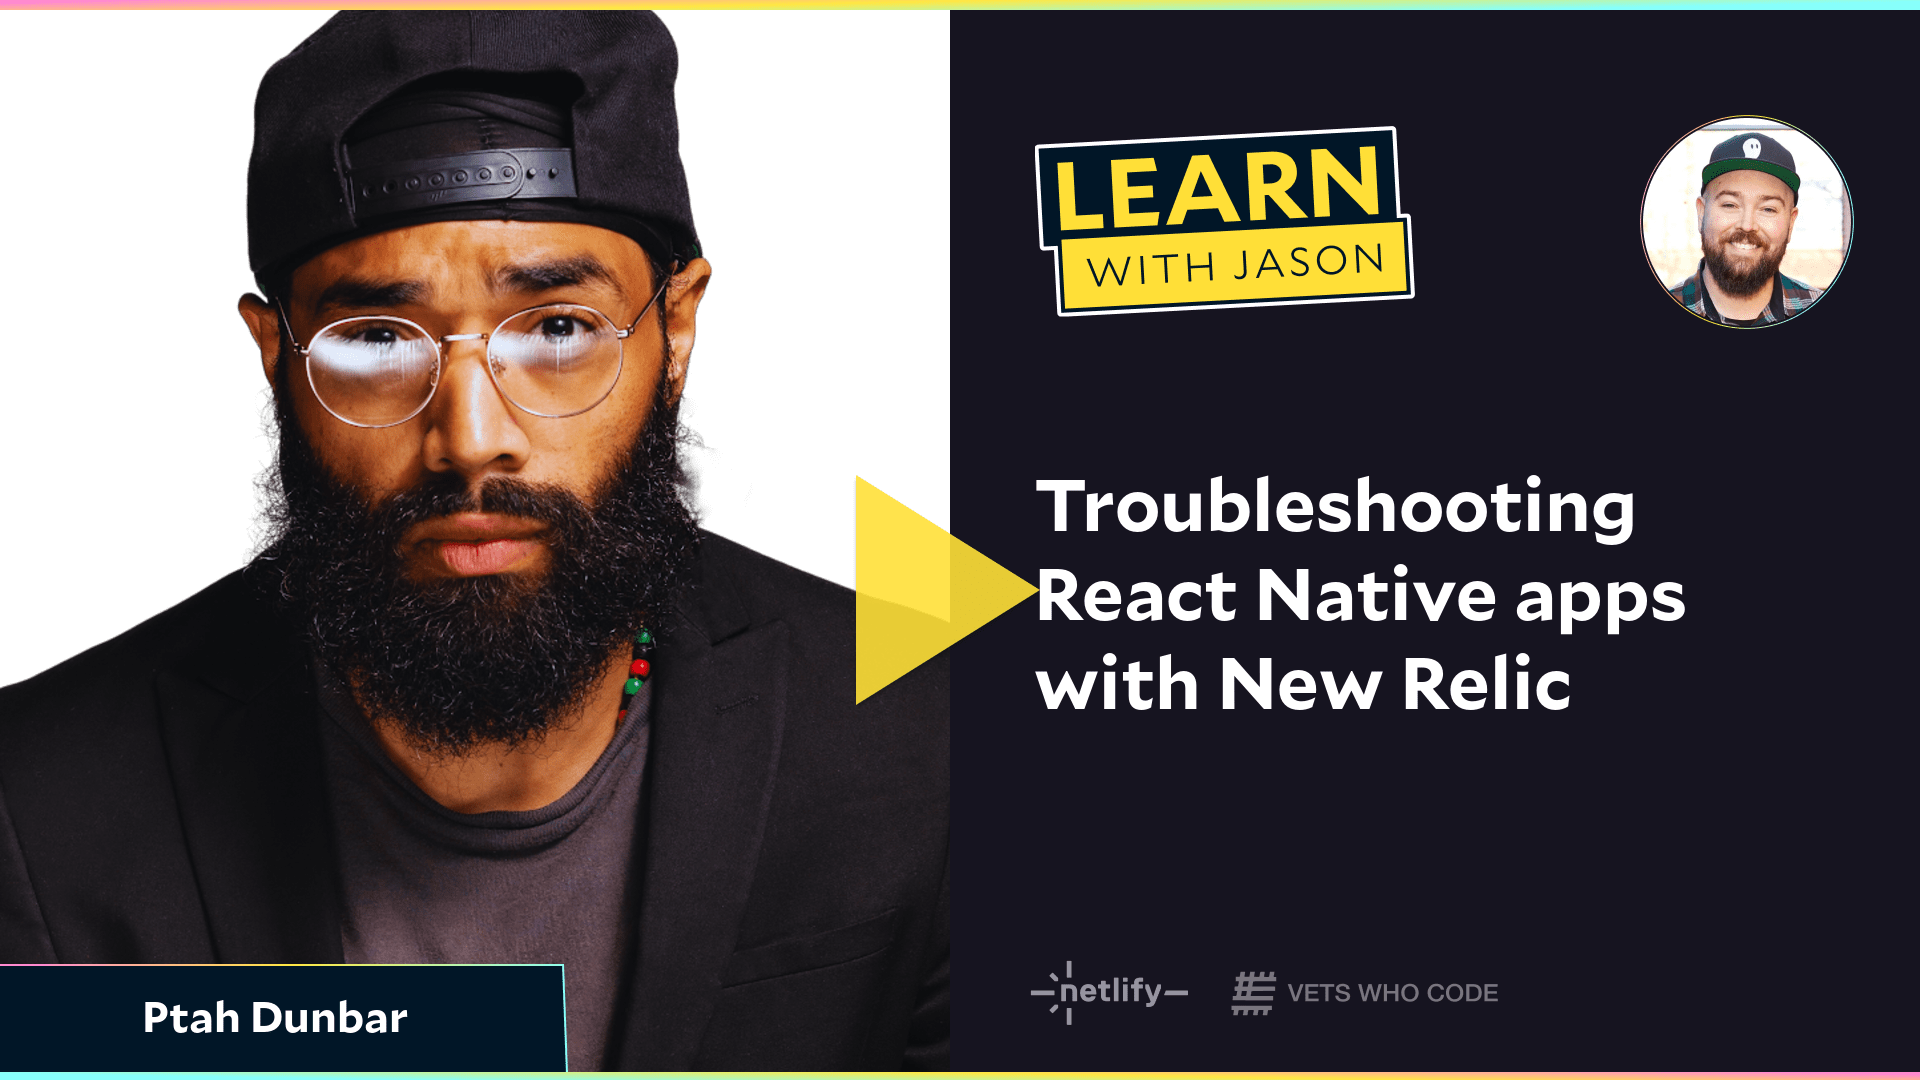 Troubleshooting React Native apps with New Relic (with Ptah Dunbar)